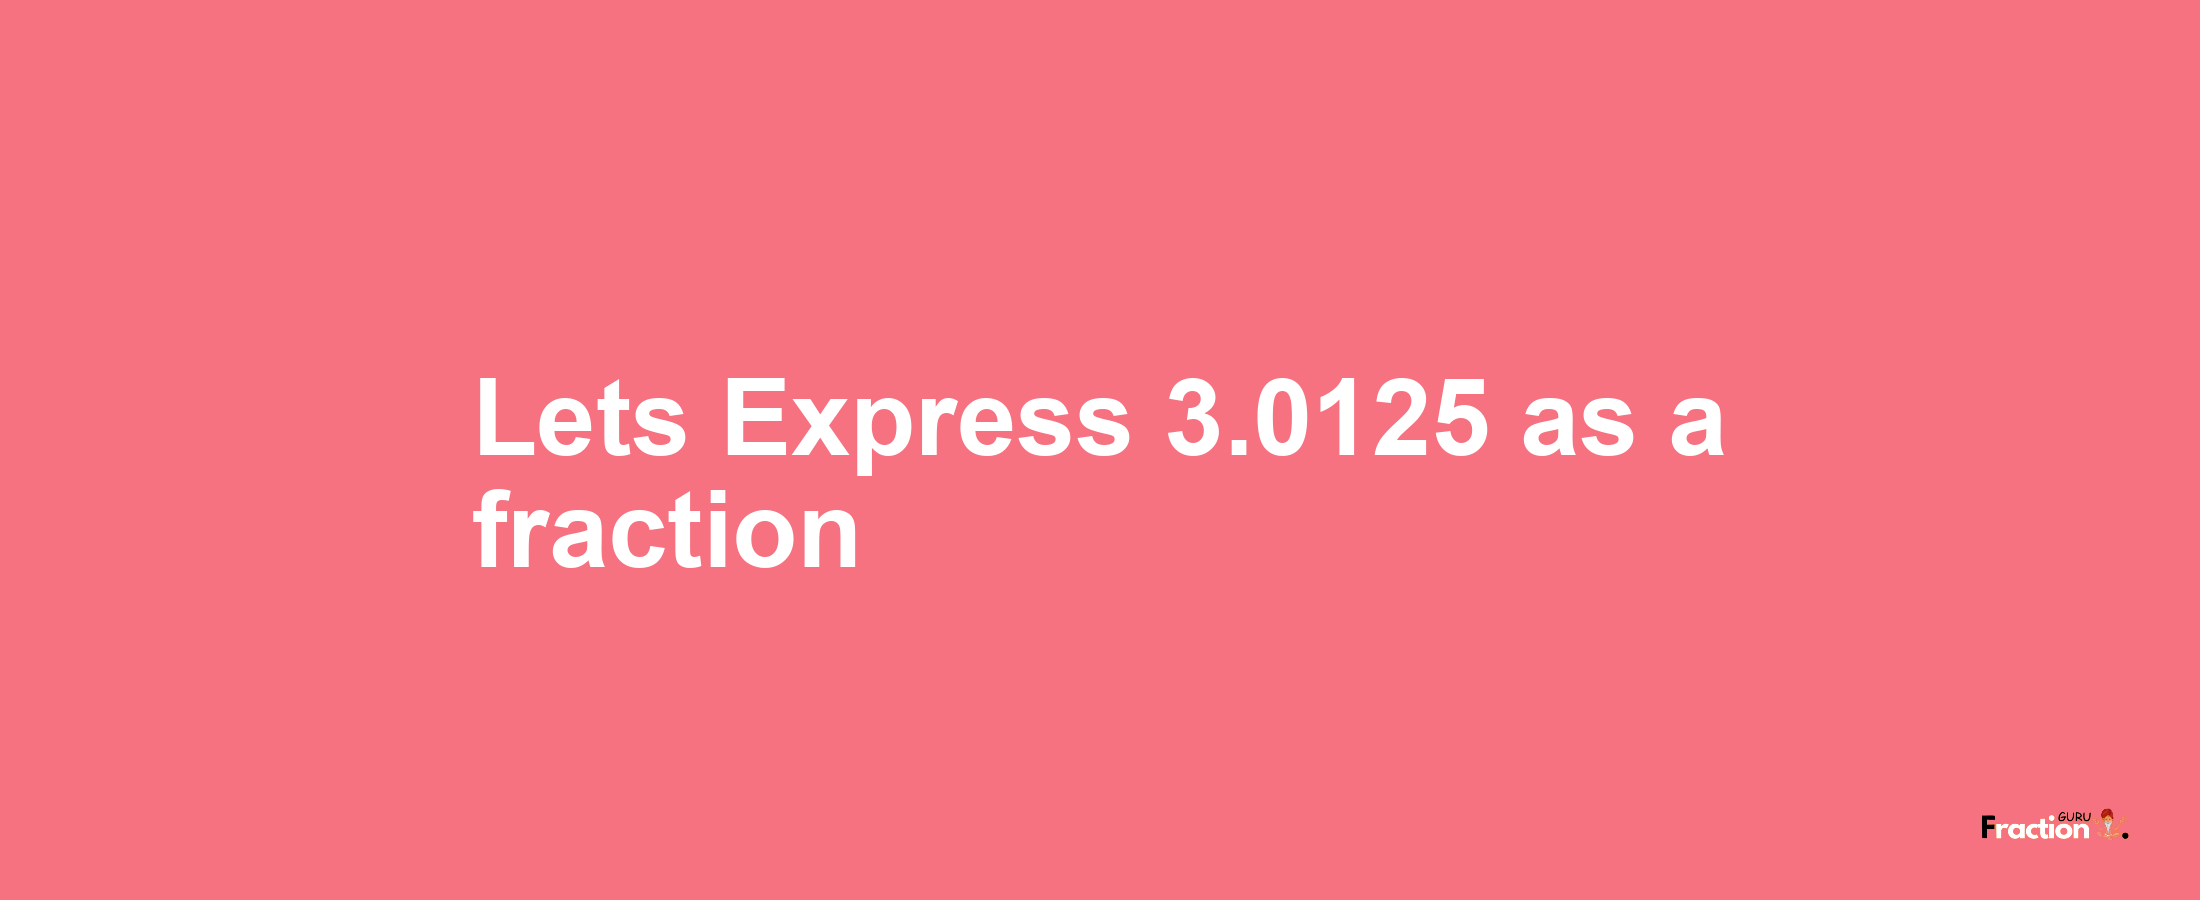 Lets Express 3.0125 as afraction